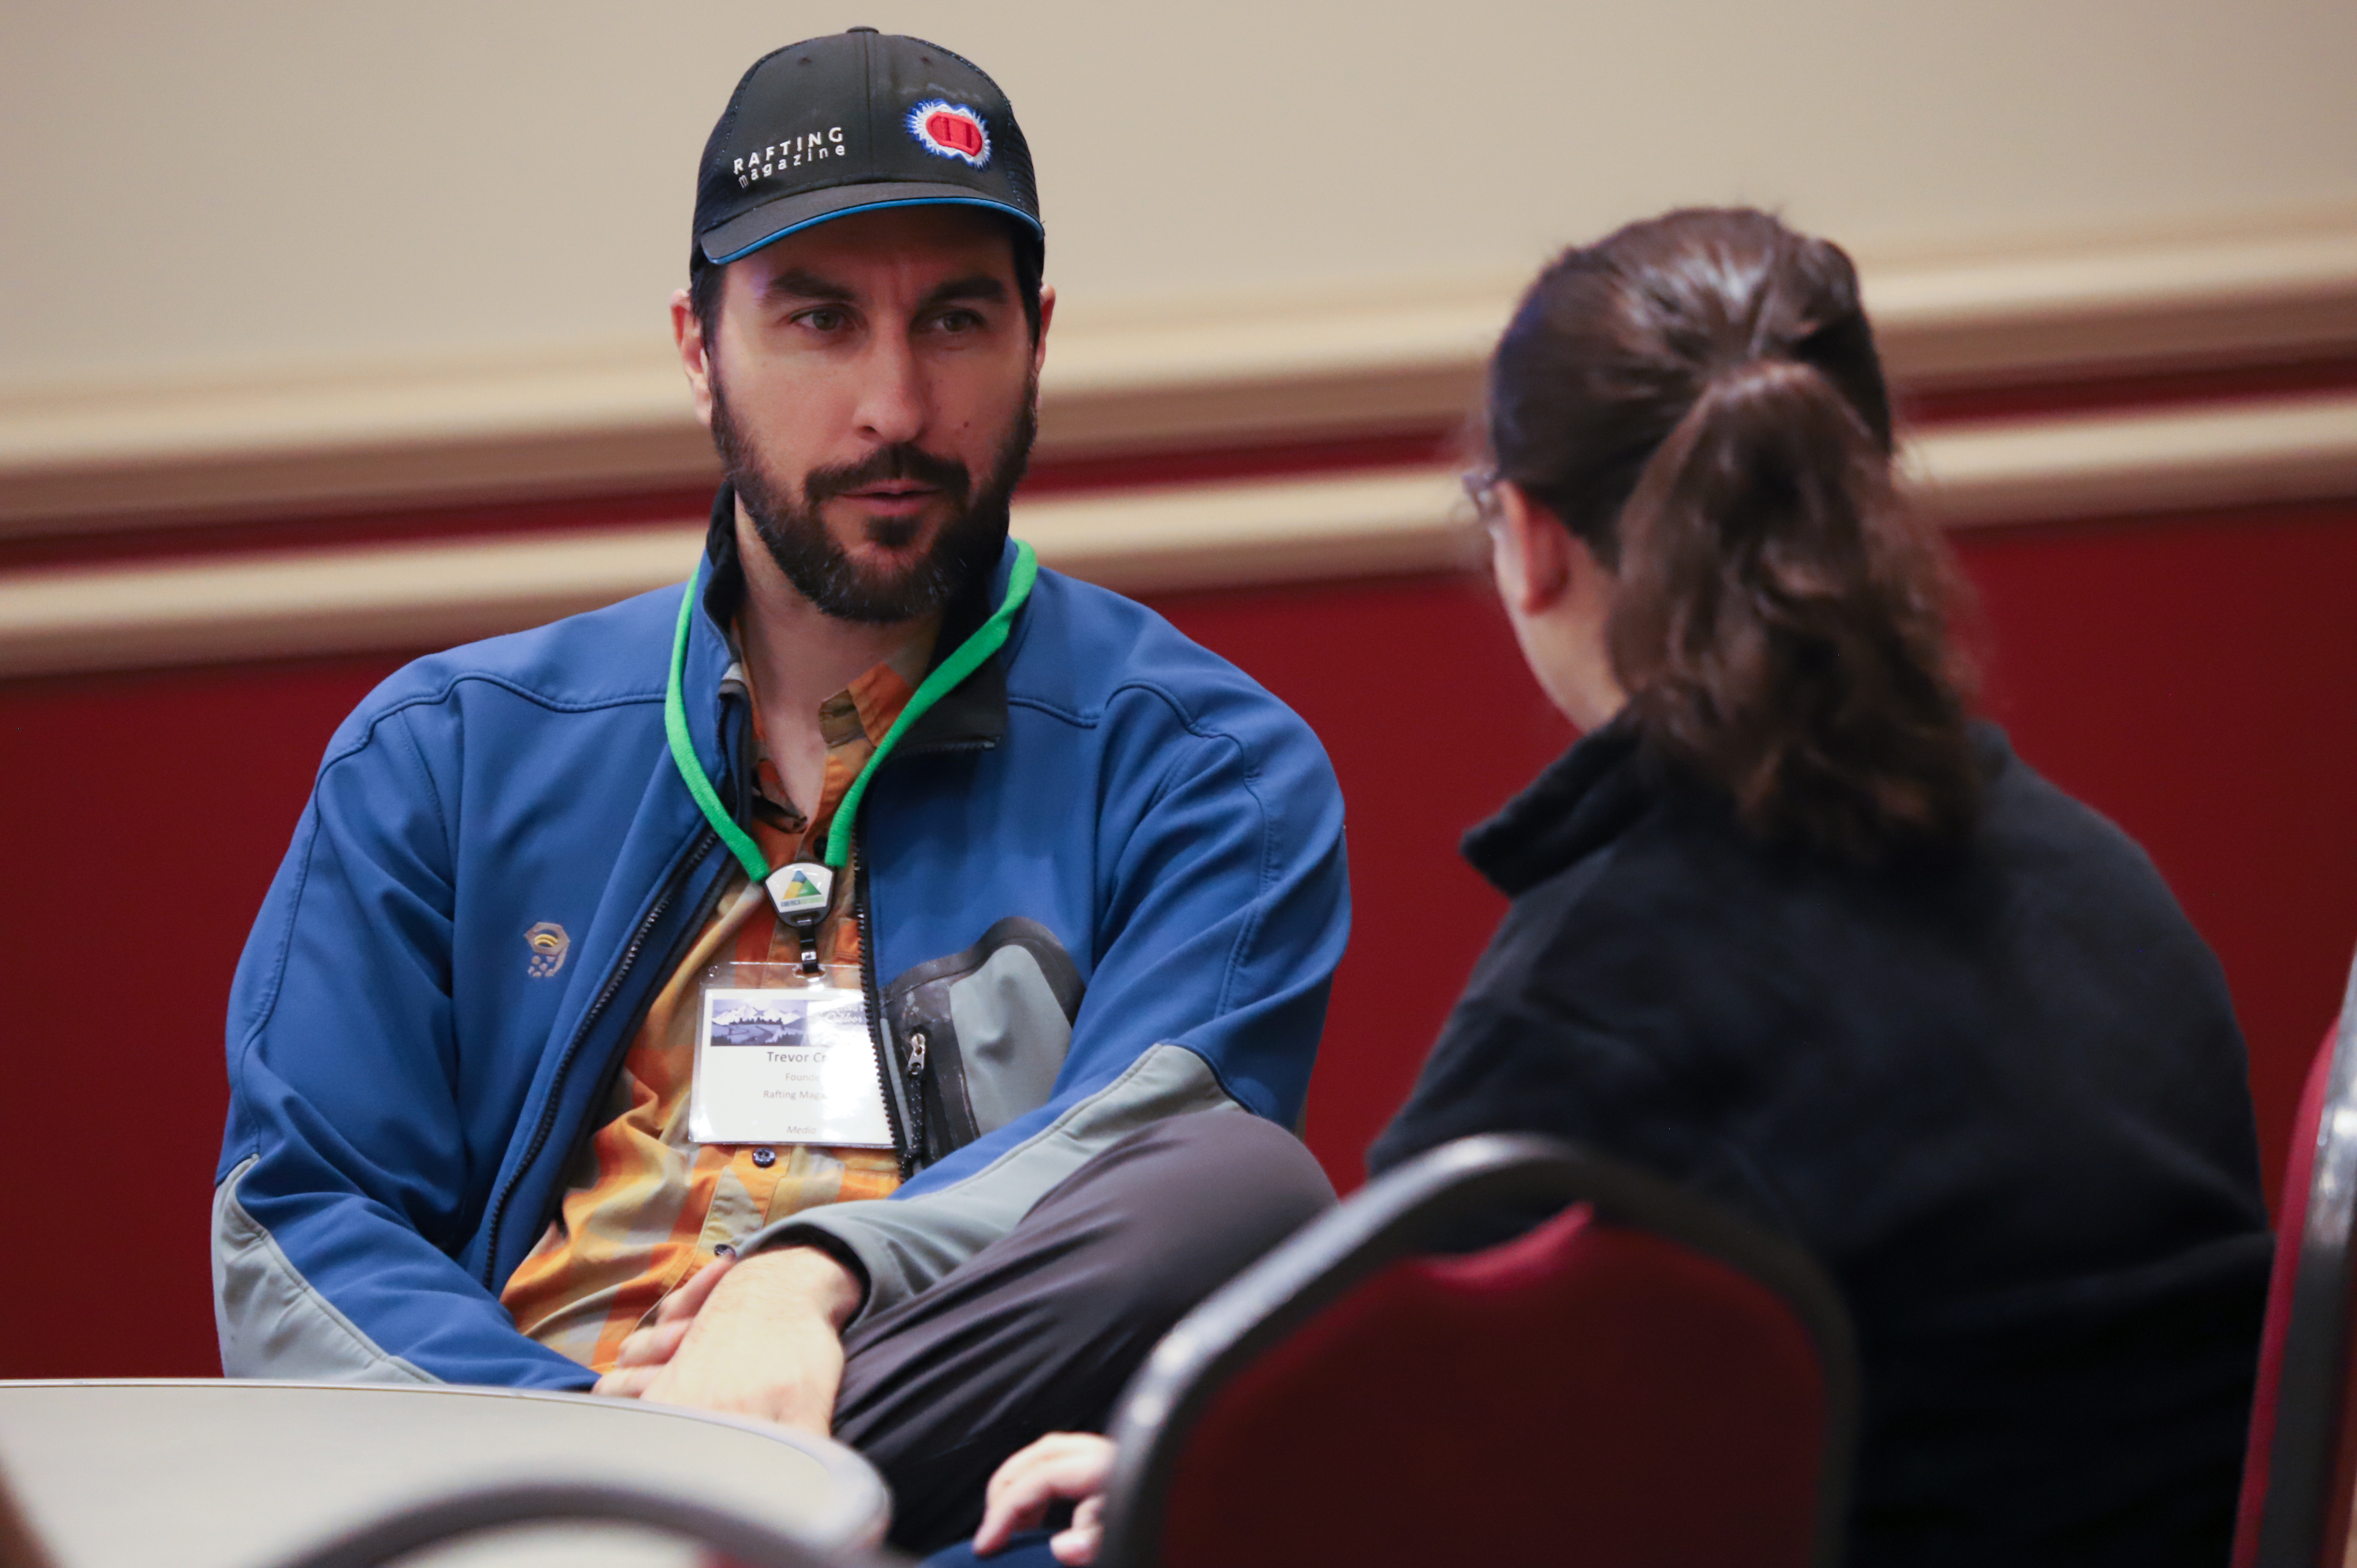 Editor of Rafting Magazine Talks to Participant at America Outdoors Conference